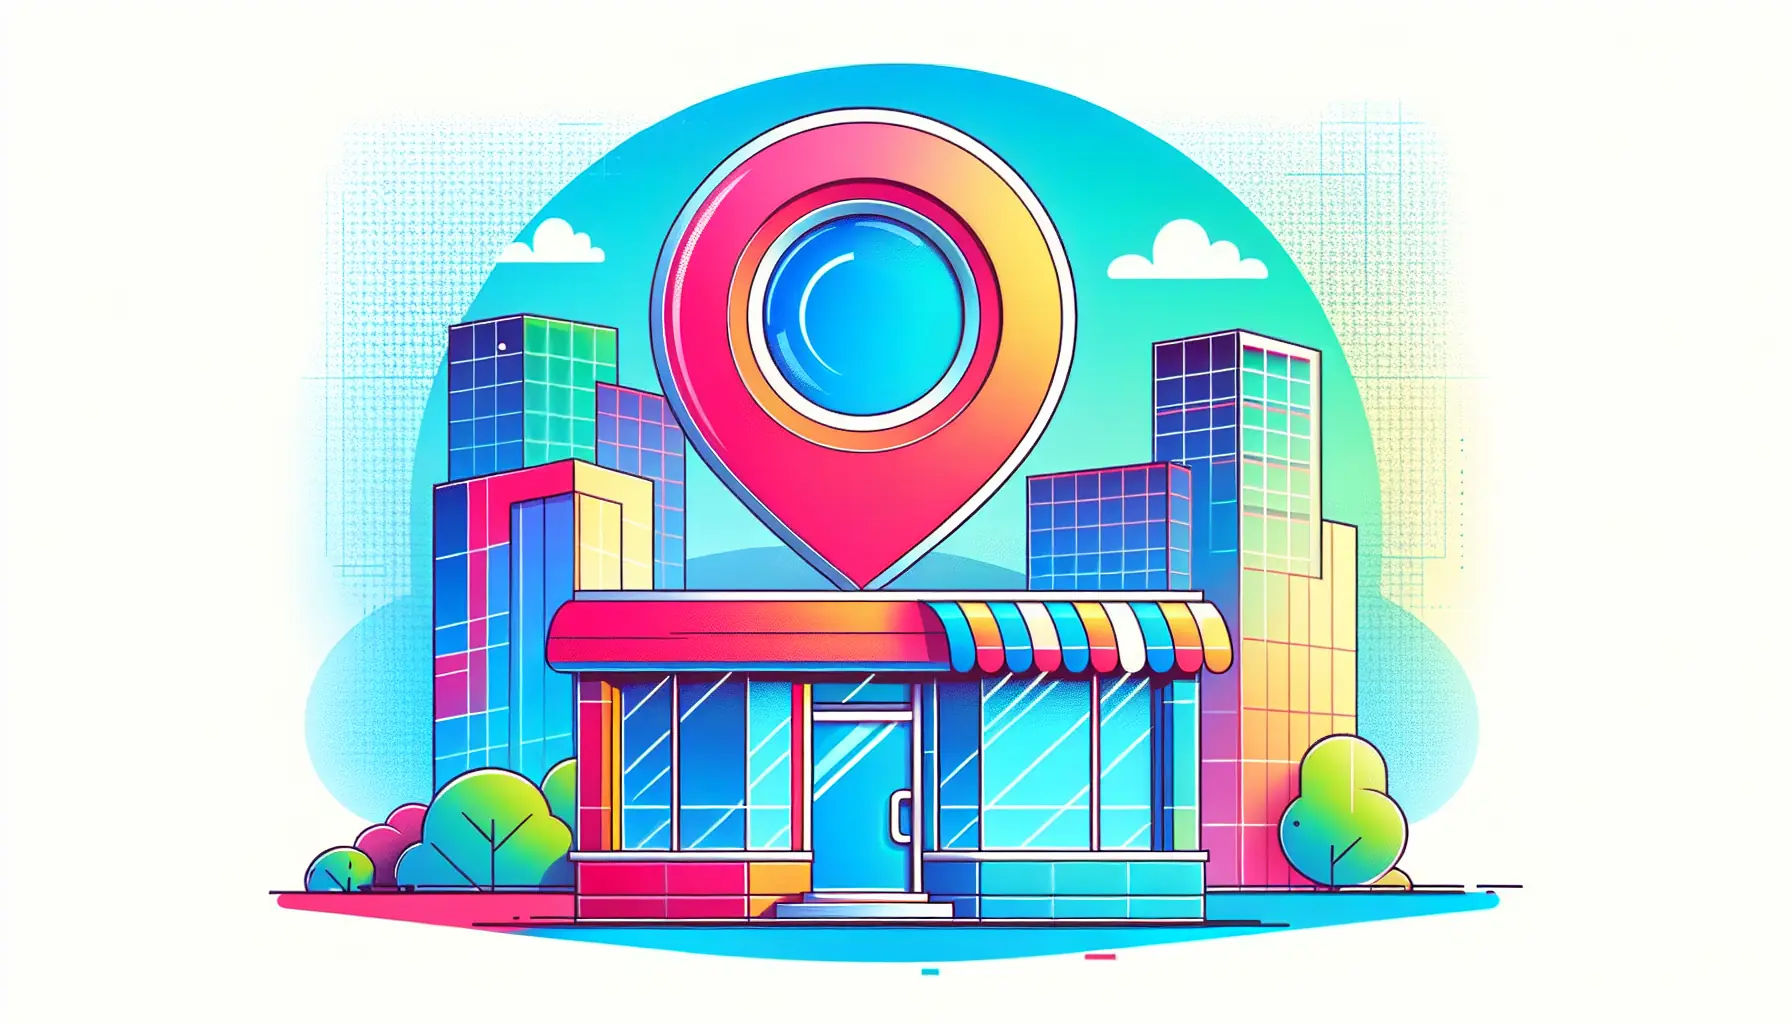 A storefront with a Google Maps pin icon hovering above it and a magnifying glass over the storefront